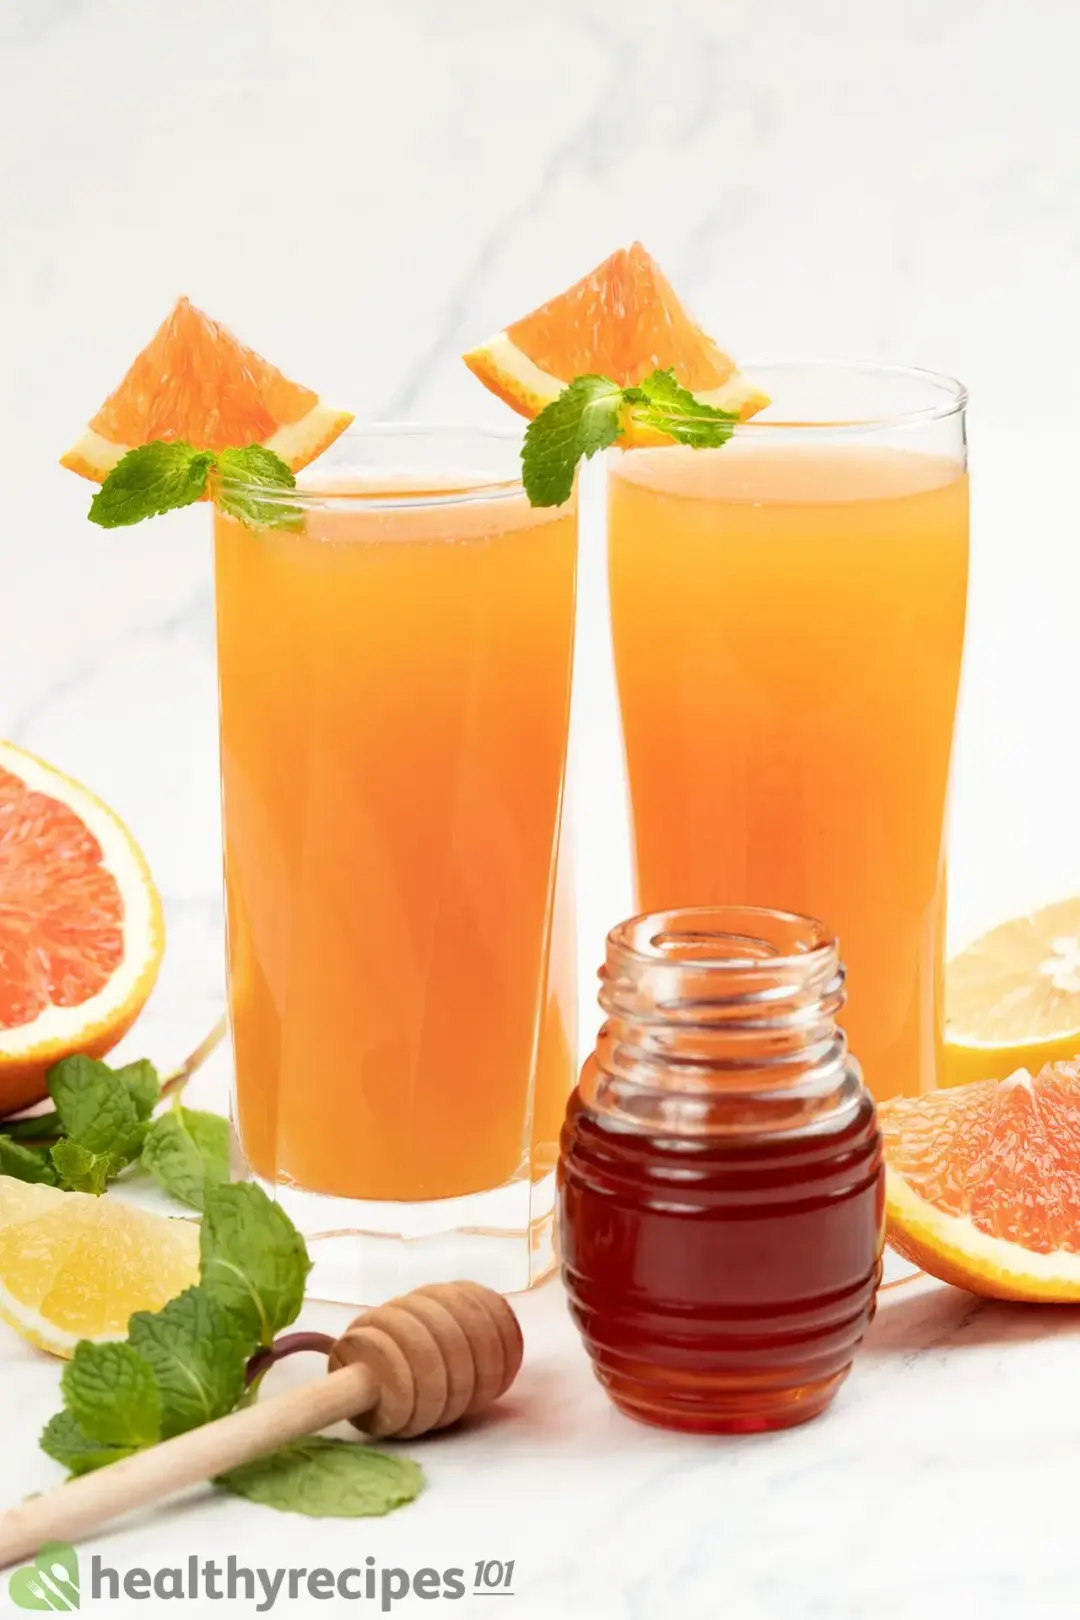 Two glasses of grapefruit juice garnished with mints, grapefruit wedges all around, and a jar of honey